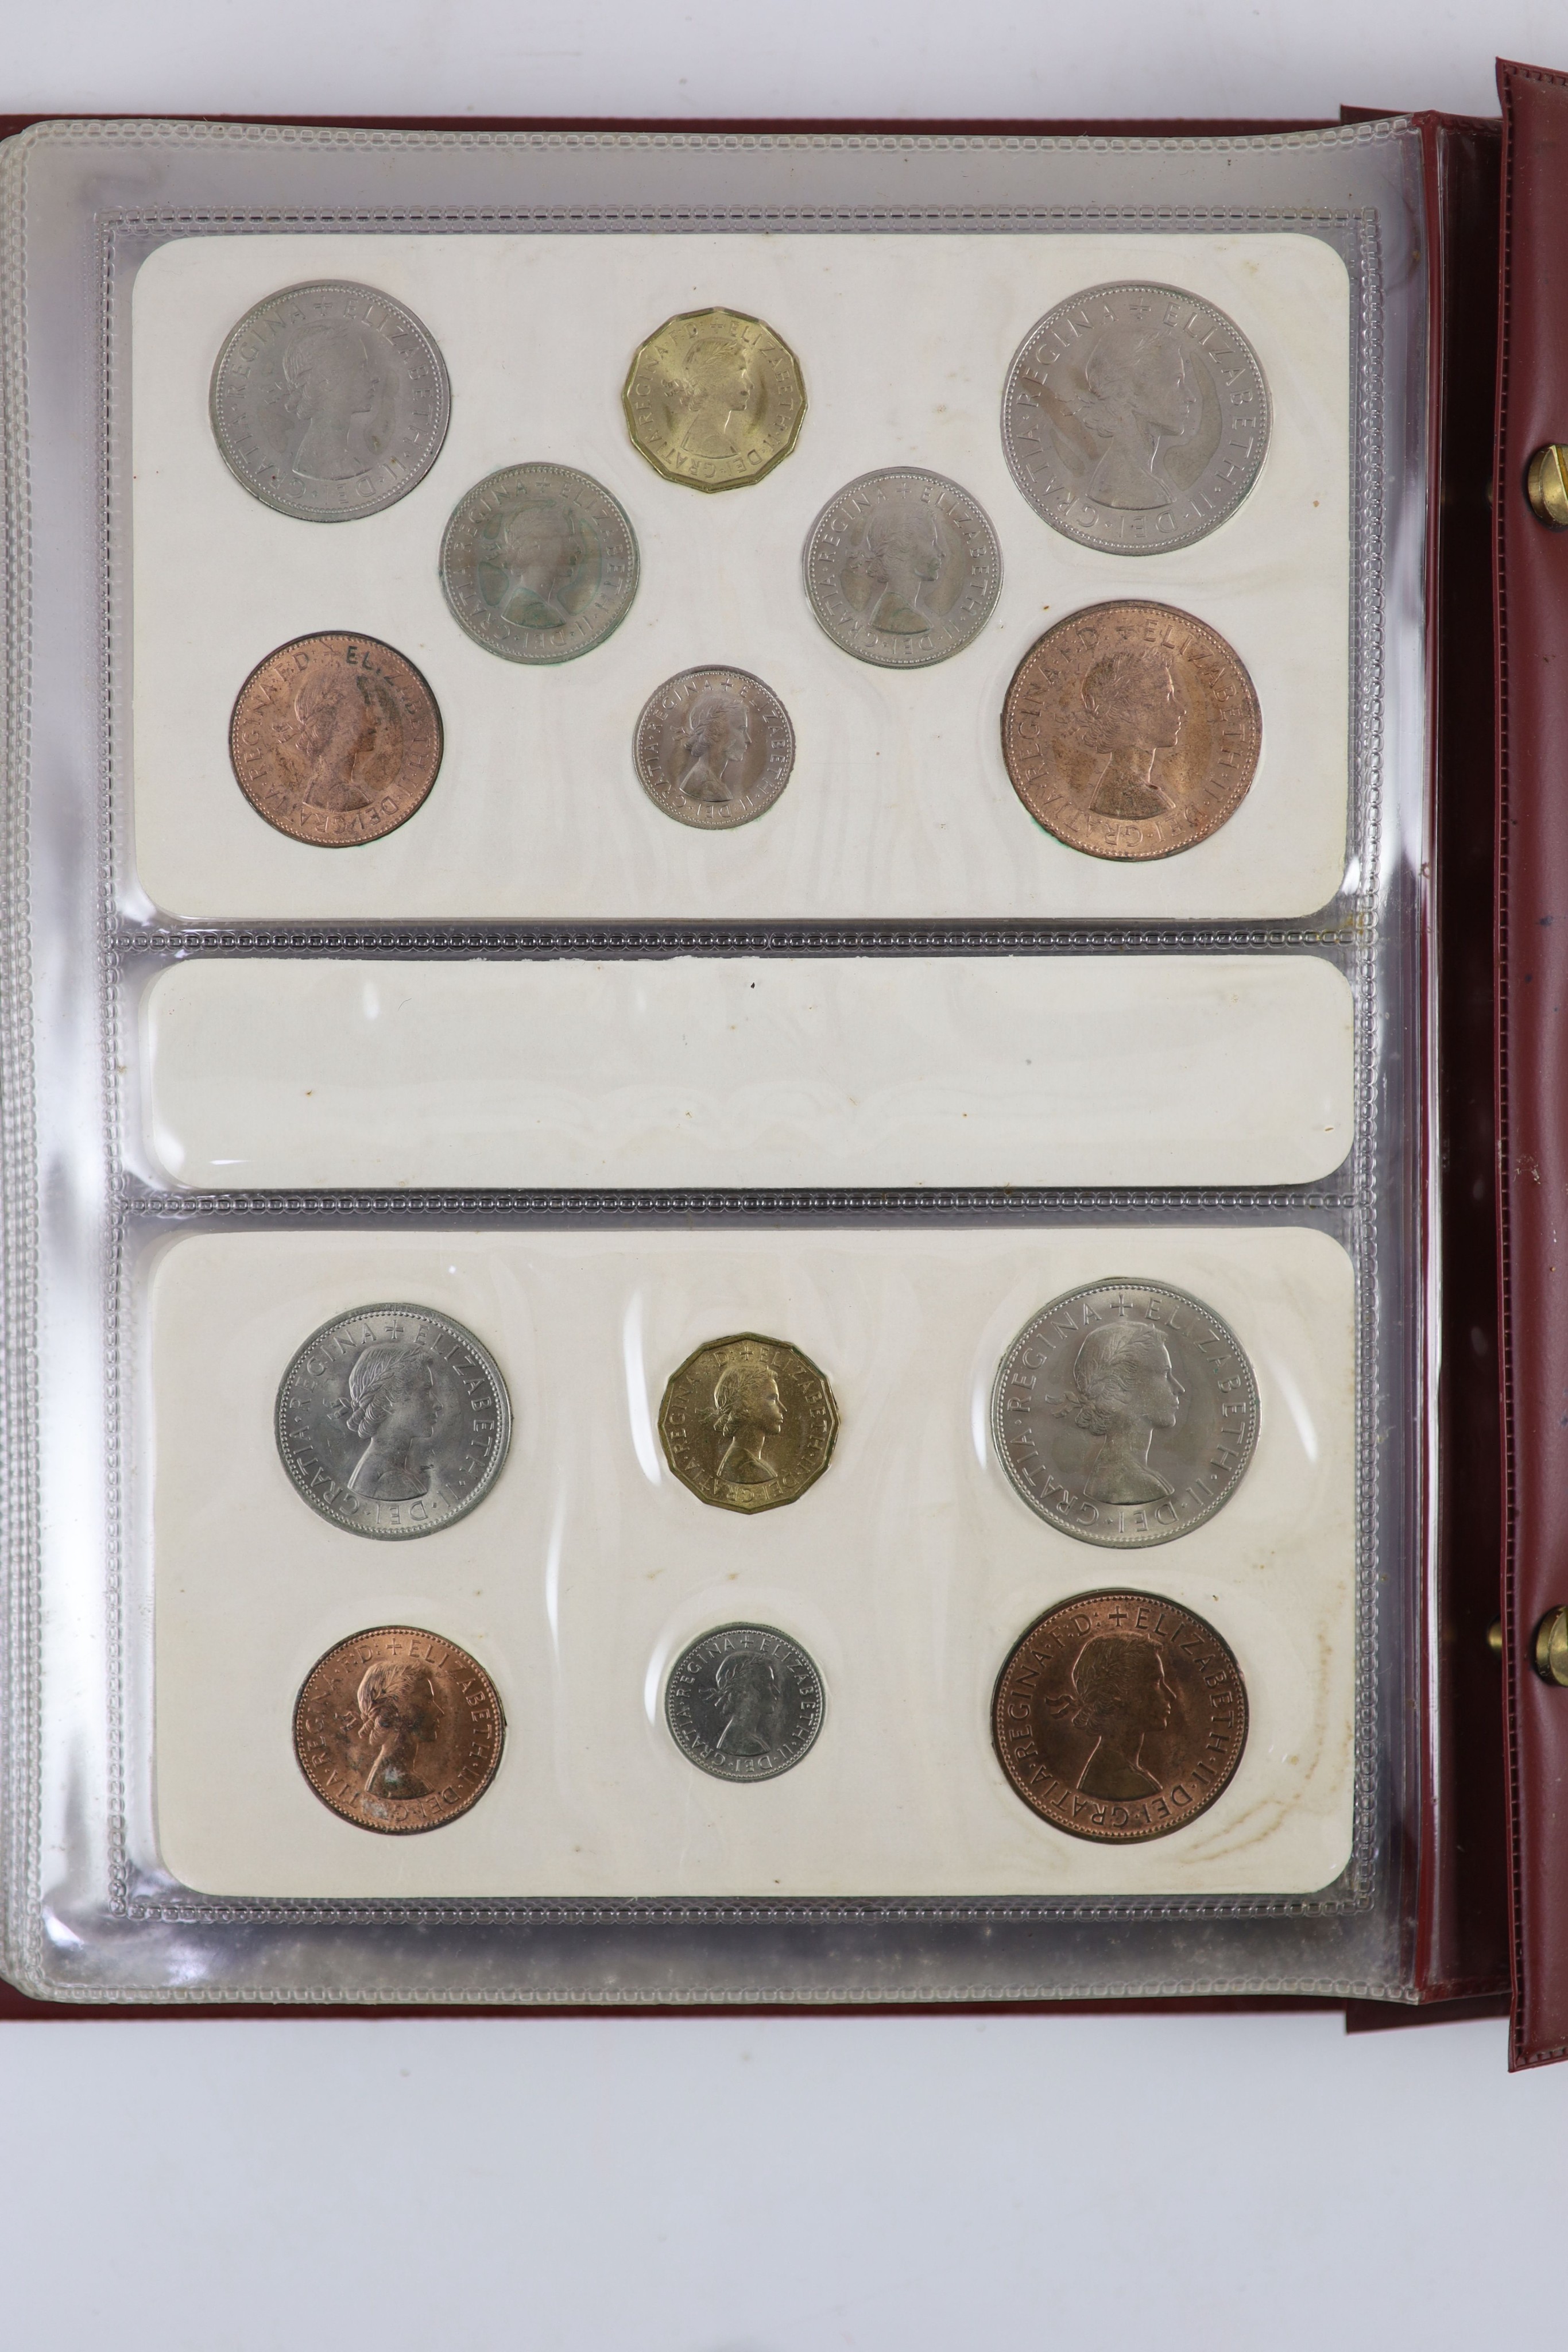 Queen Elizabeth II pre-decimal specimen coin sets for 1953 - 1967, first and second issues, all EF/ - Image 23 of 34